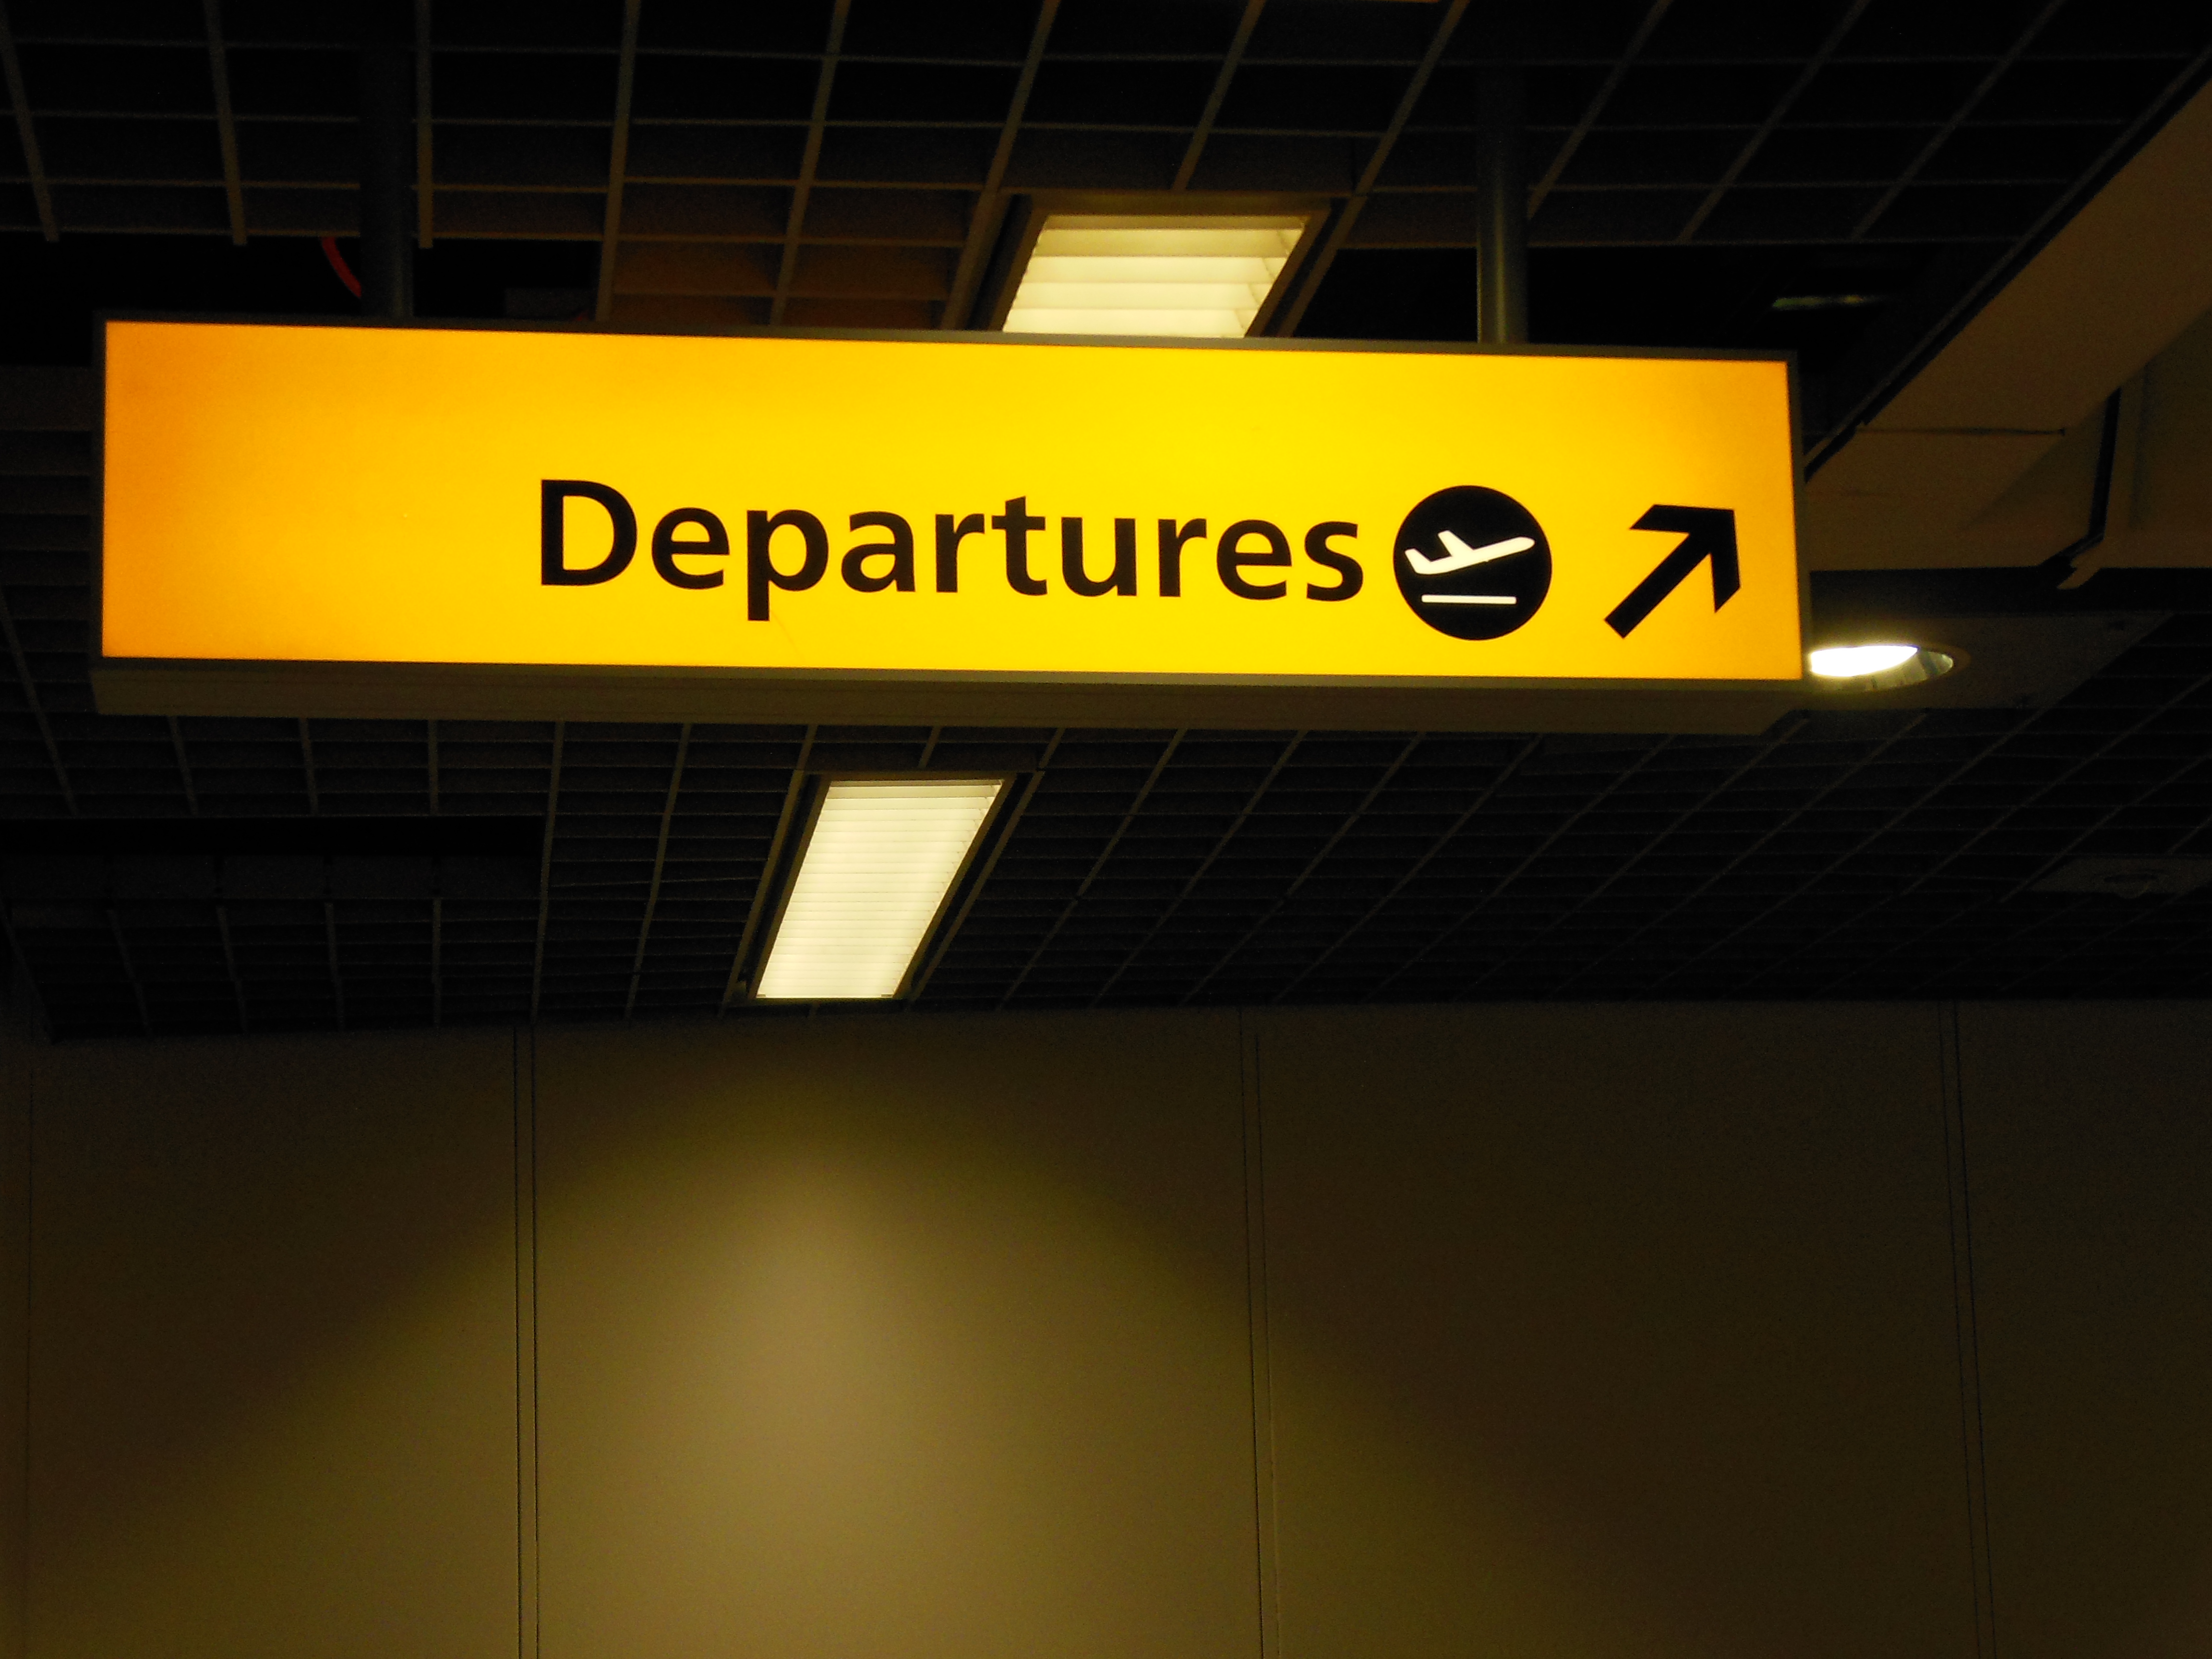 Departures and arrivals | The Chili Diaries